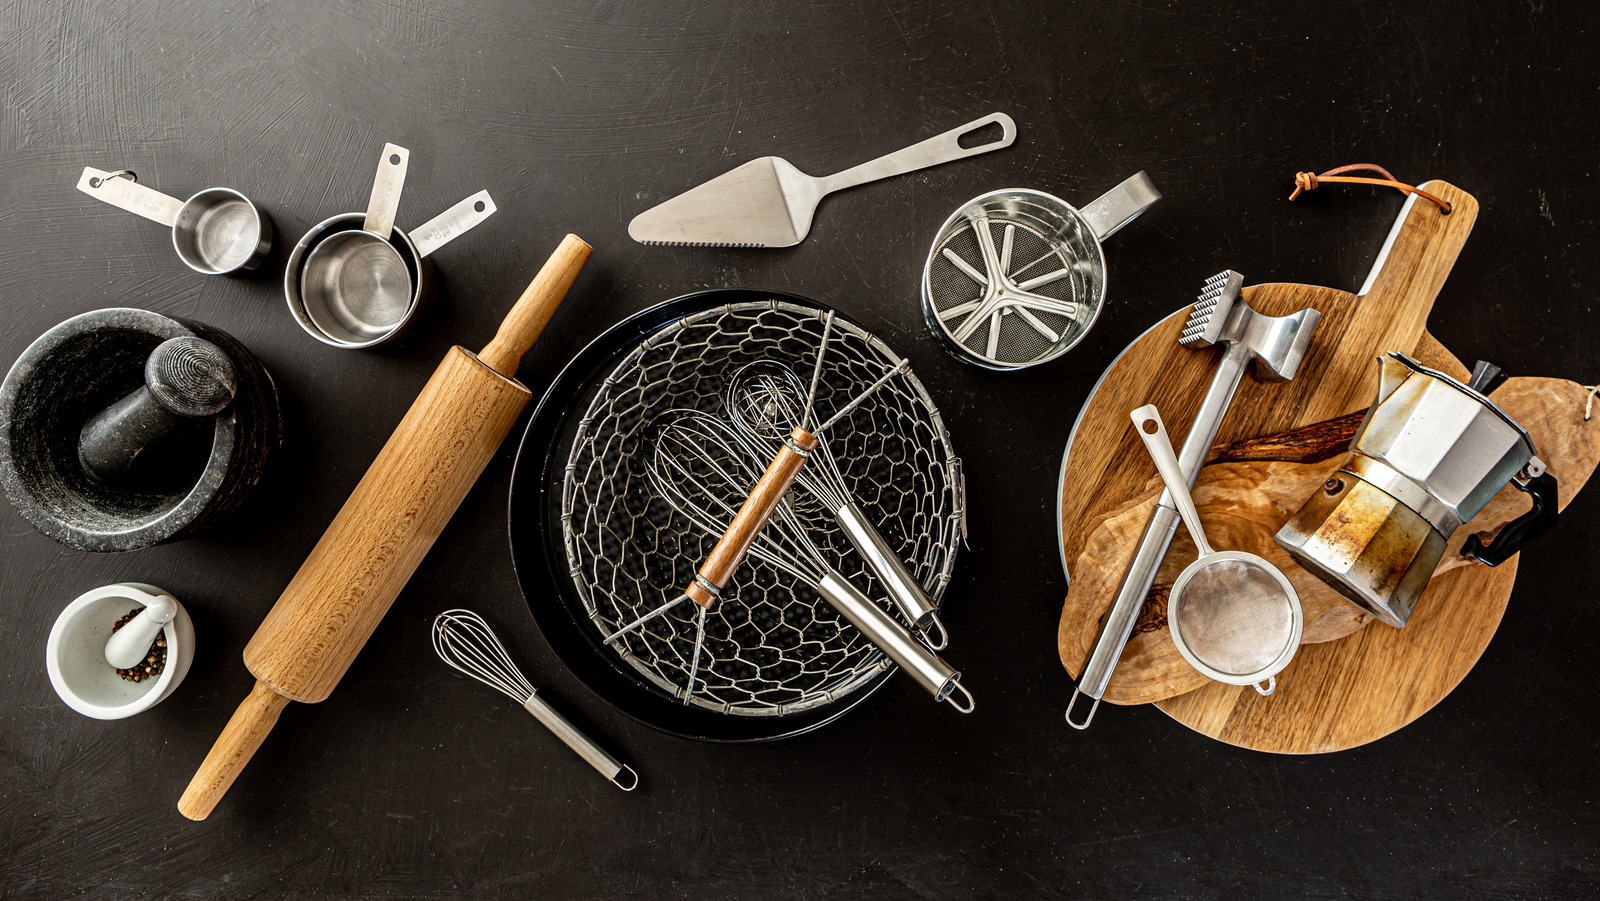 Gordon Ramsay's favorite cookware and the knives he calls 'the